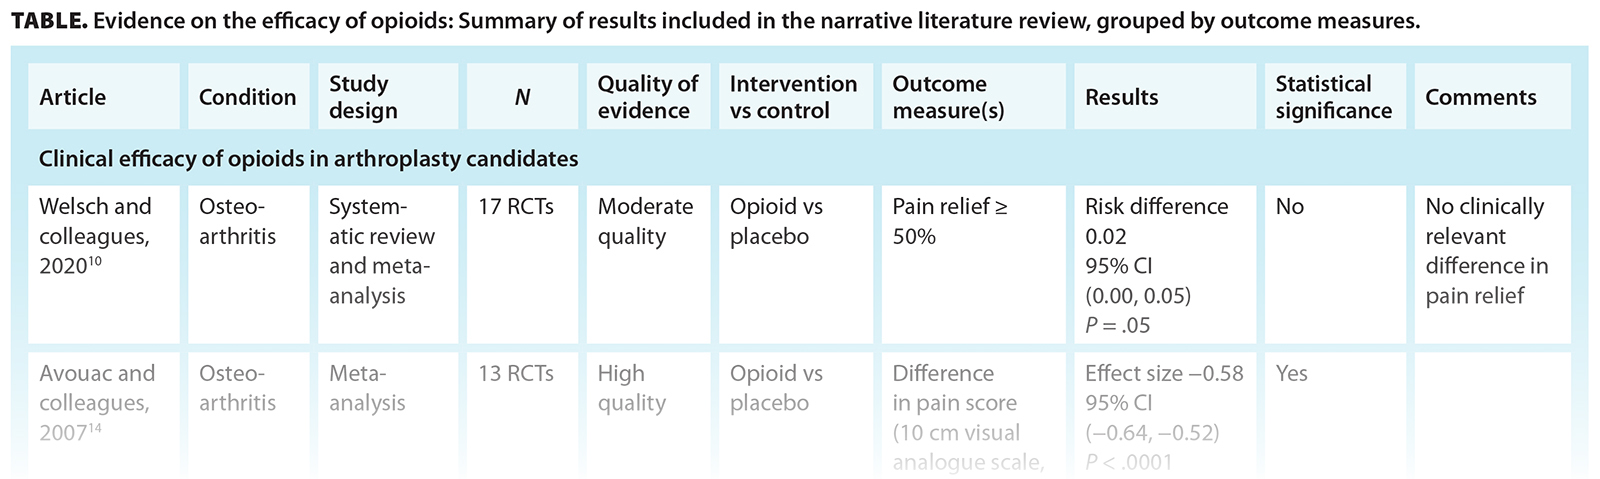  Summary of results included in the narrative literature review, grouped by outcome measures.